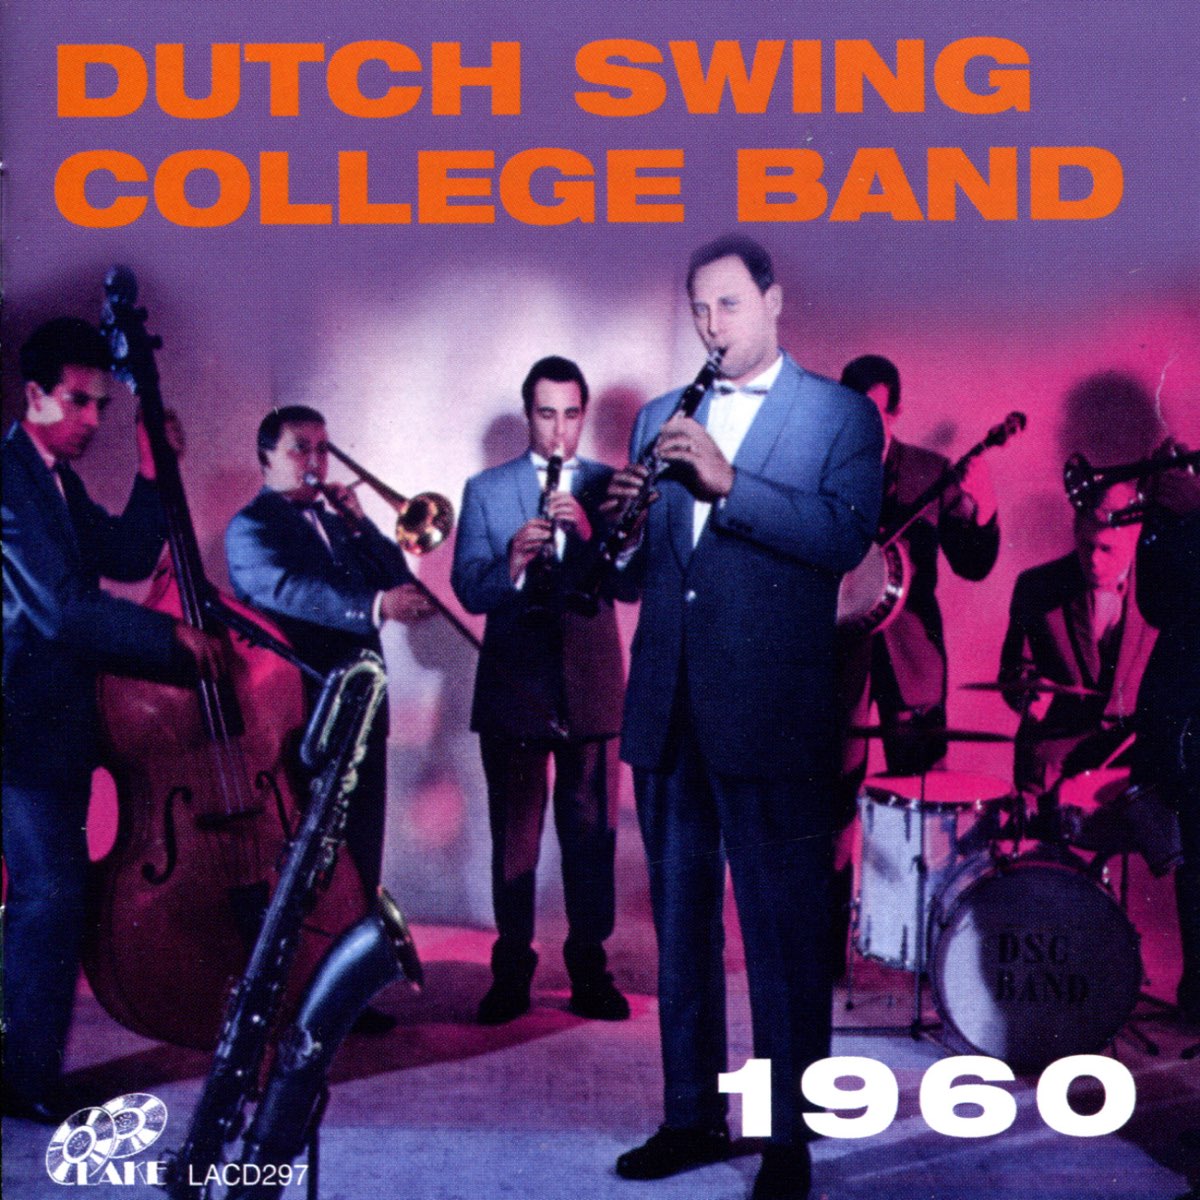 ‎dutch Swing College Band 1960 By Dutch Swing College Band On Apple Music